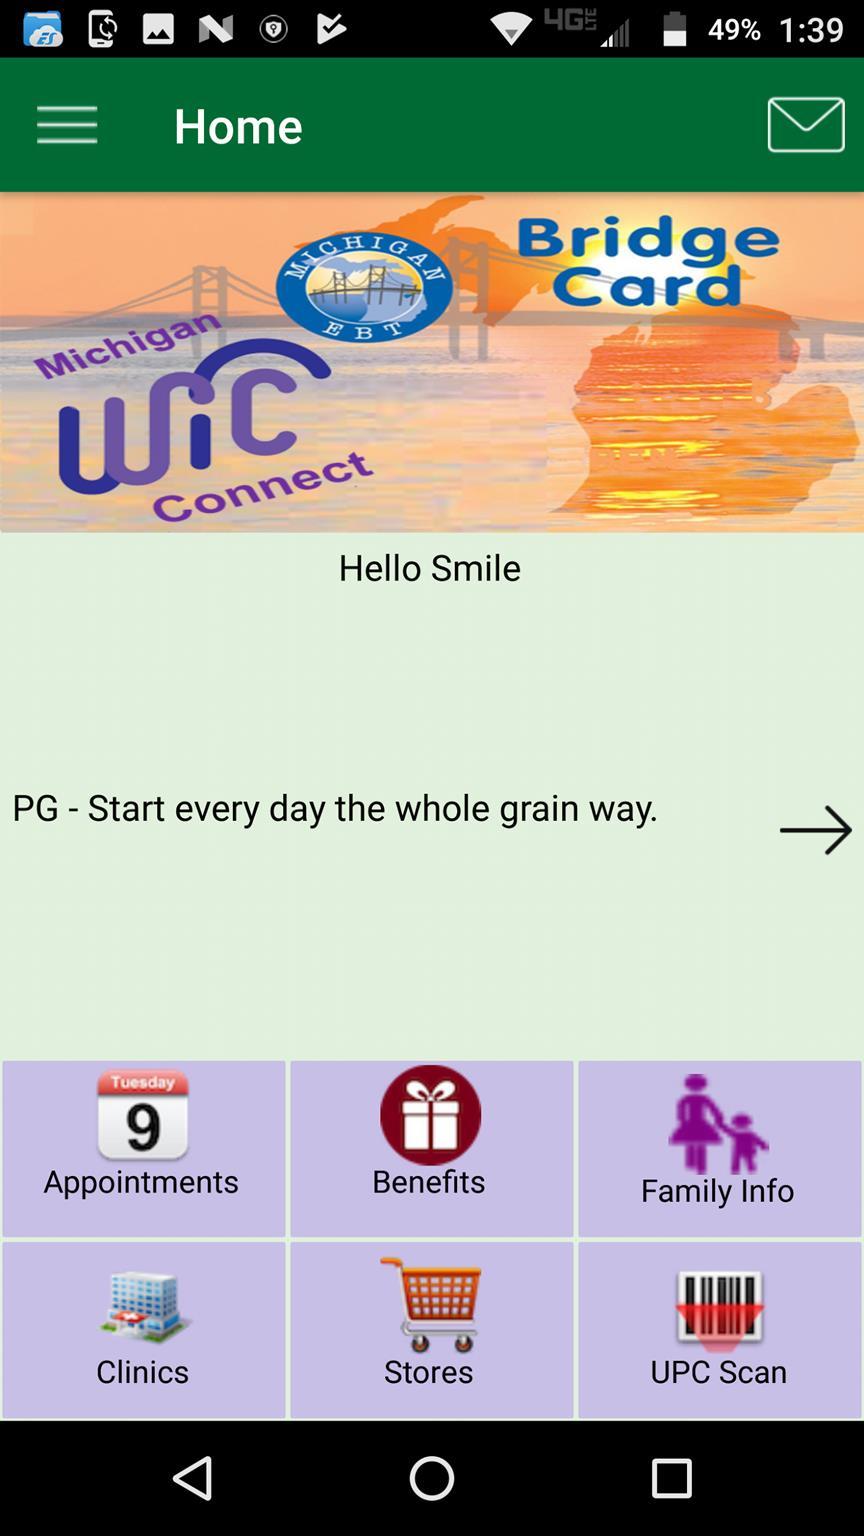 Home Screen After registering/login as Existing-WIC client,the home page screen